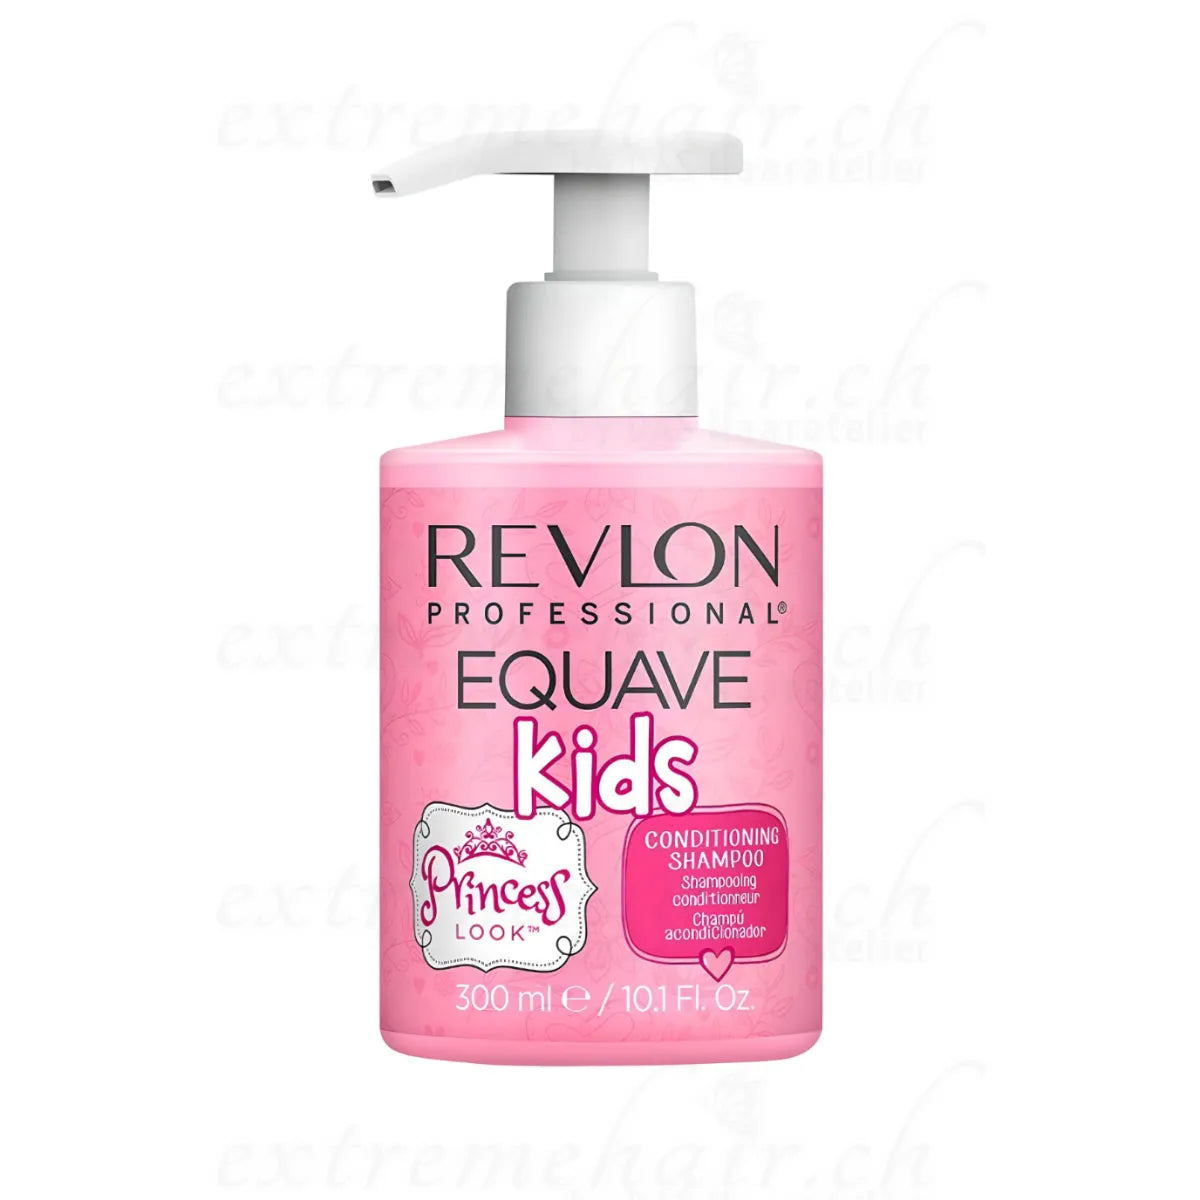 Revlon Professional Equave - Kids Princess Look Conditioning Shampoo 2 in 1